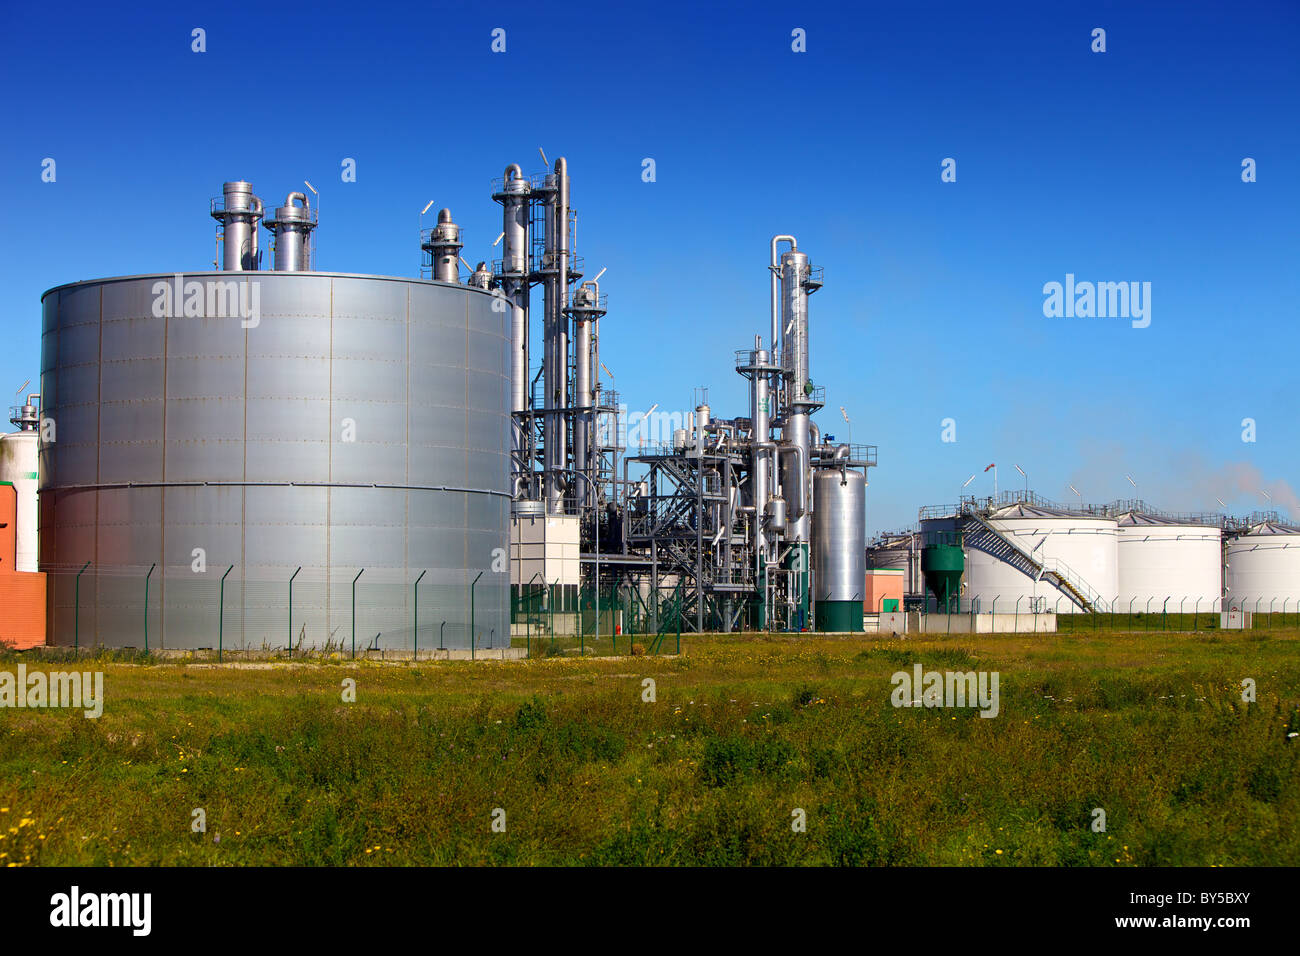 A tank farm, chemical refinery and silos Stock Photo